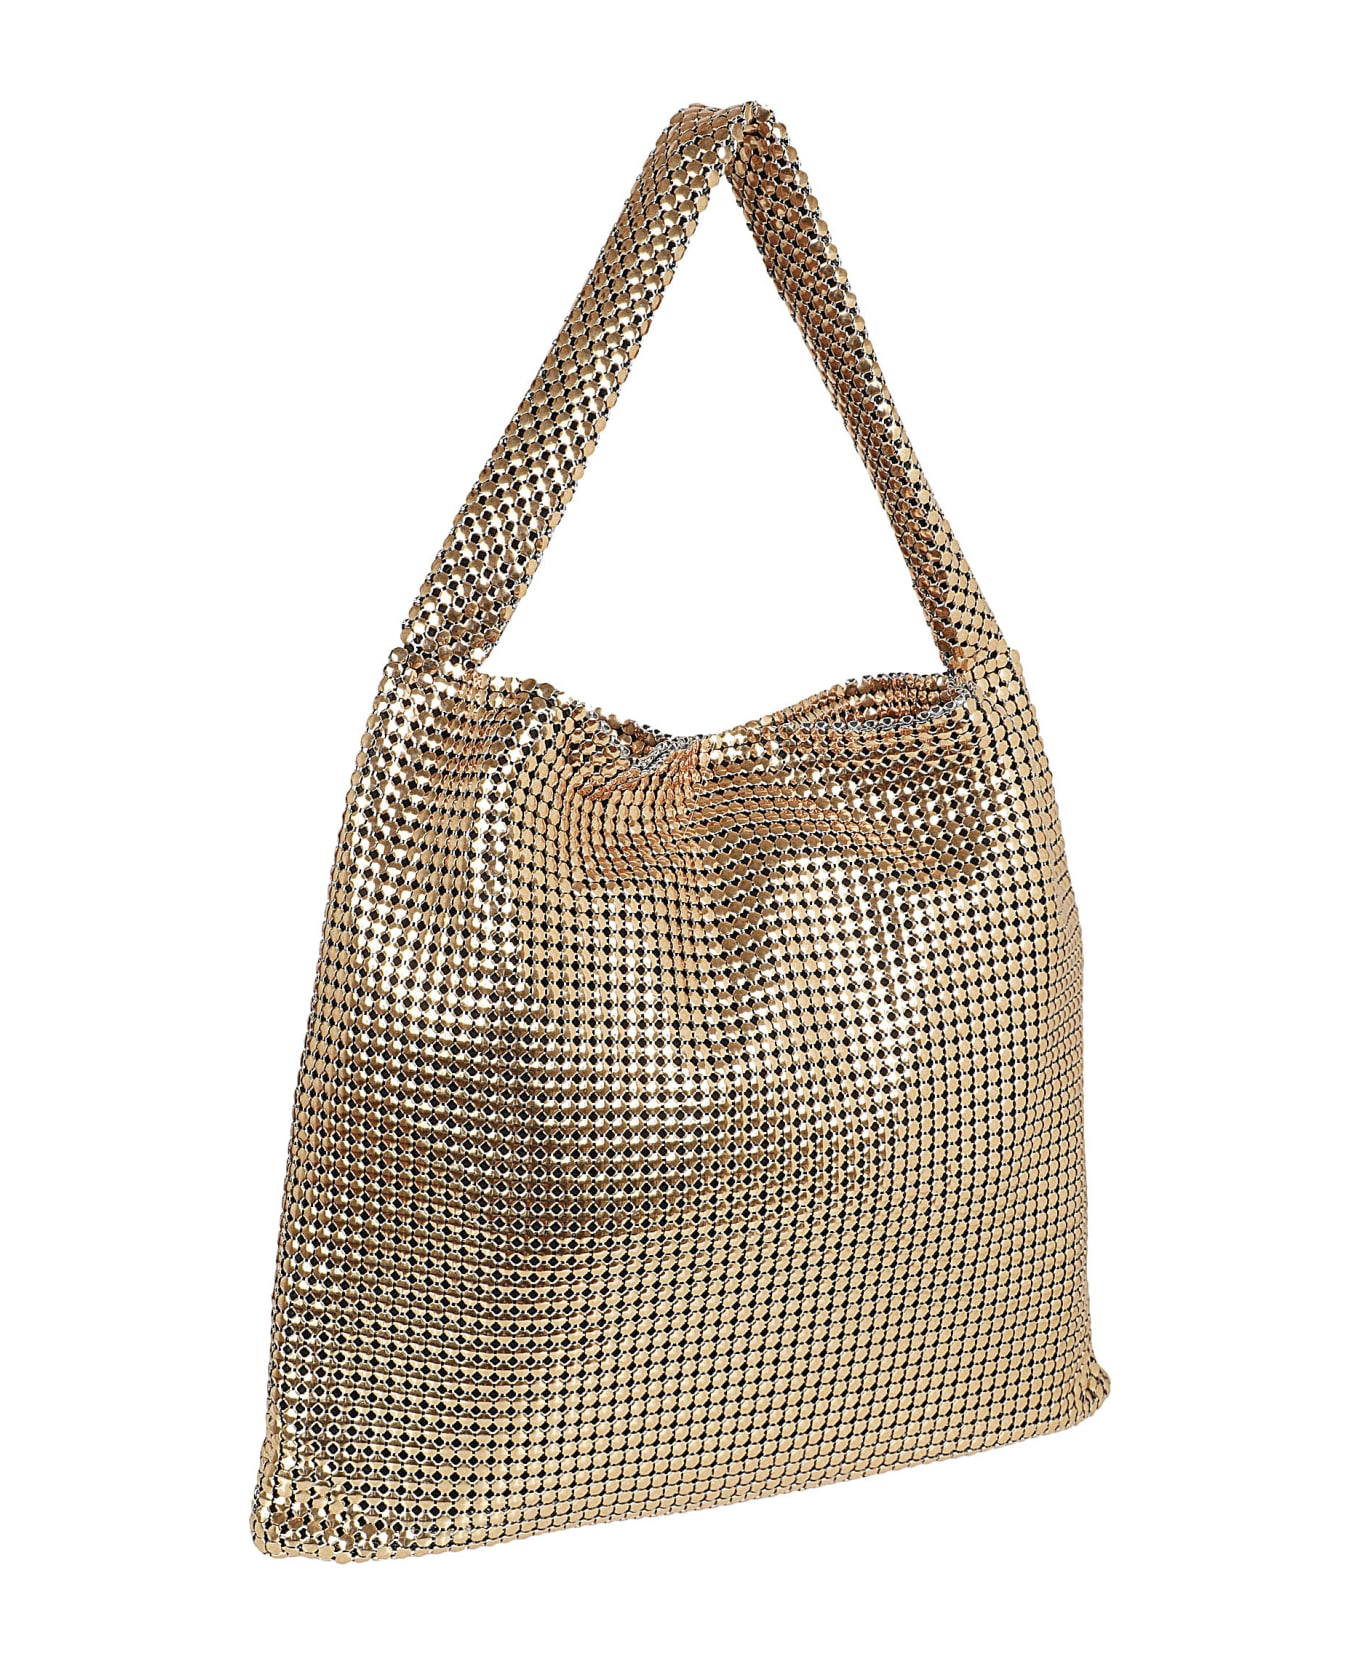 Paco Rabanne Pixel Tote - Gold